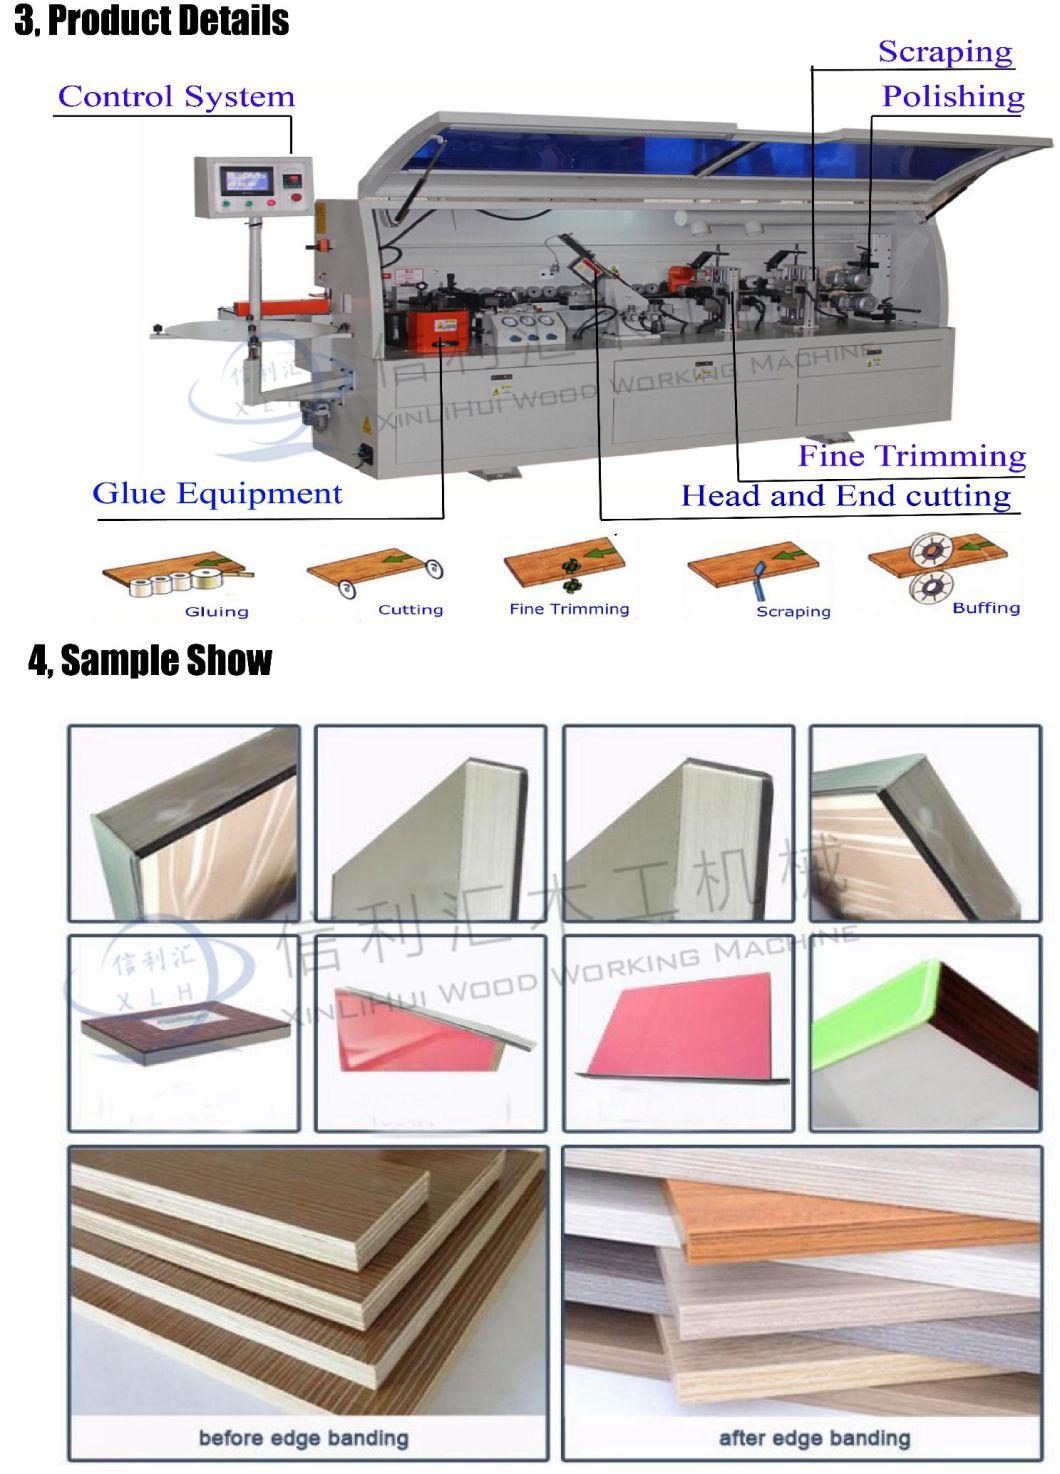 Full Automatic Edge Banding Machine with Corner Trimming/ Grooving Function Competitive Price / Heat Shrink Wrap Woodworking PVC MDF Wood Glue Edge Bander